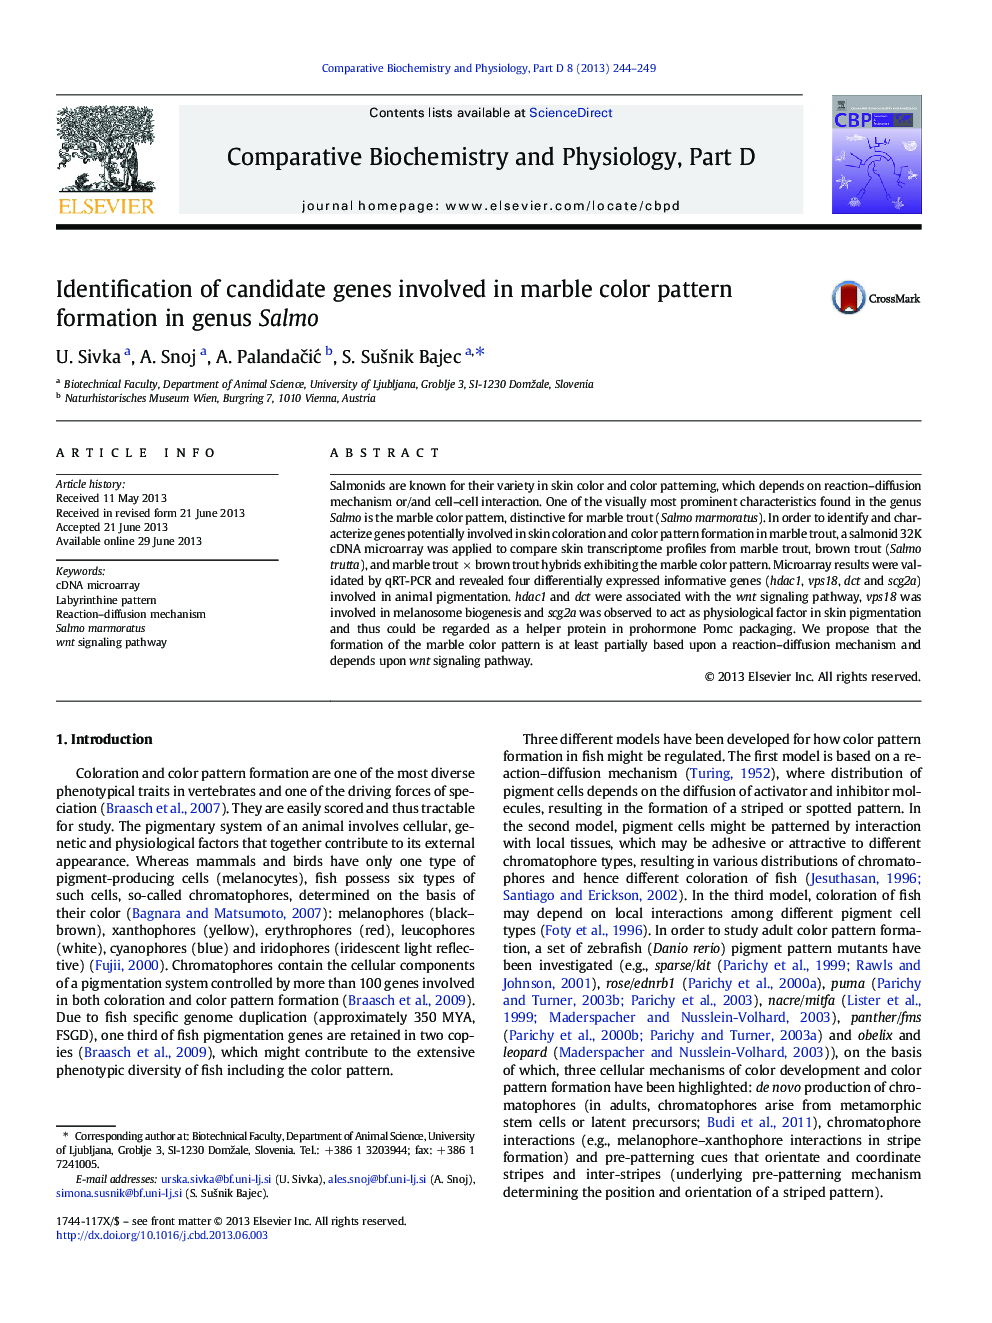 Identification of candidate genes involved in marble color pattern formation in genus Salmo